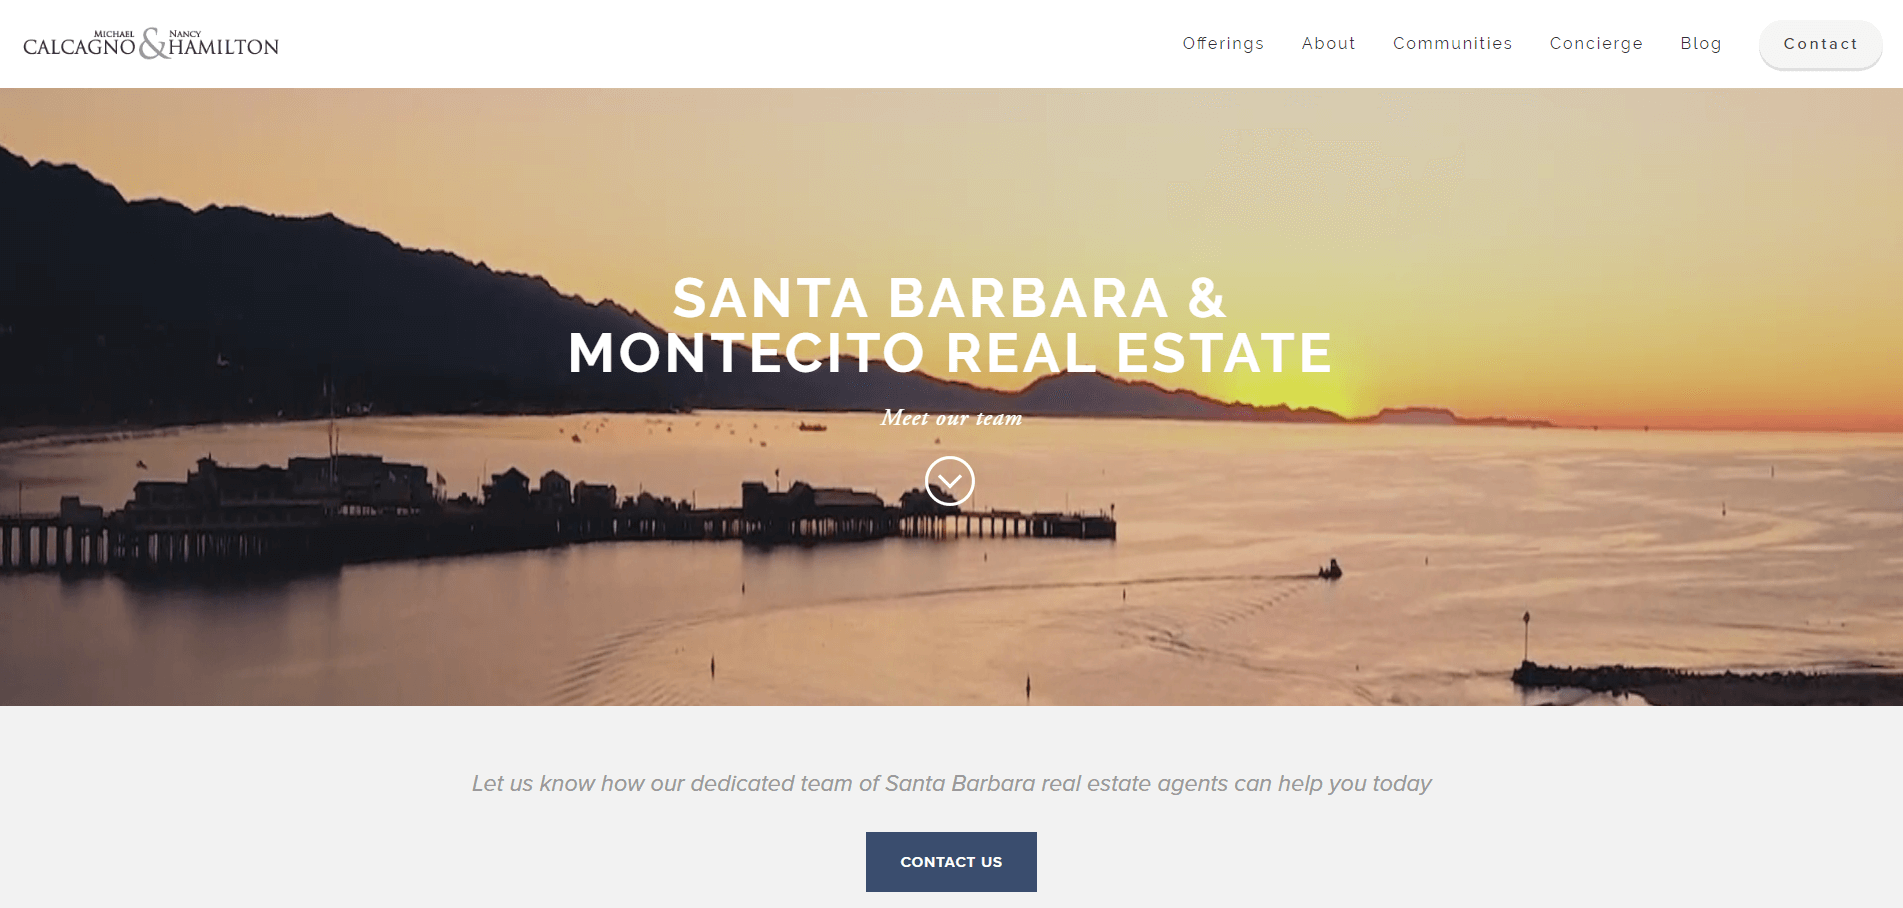  WOW!  We listed 101 of the best real estate websites.  We reviewed each site and ranked them 1-101.  Here's homesinsantabarbara.com.  Guess who made #1! 